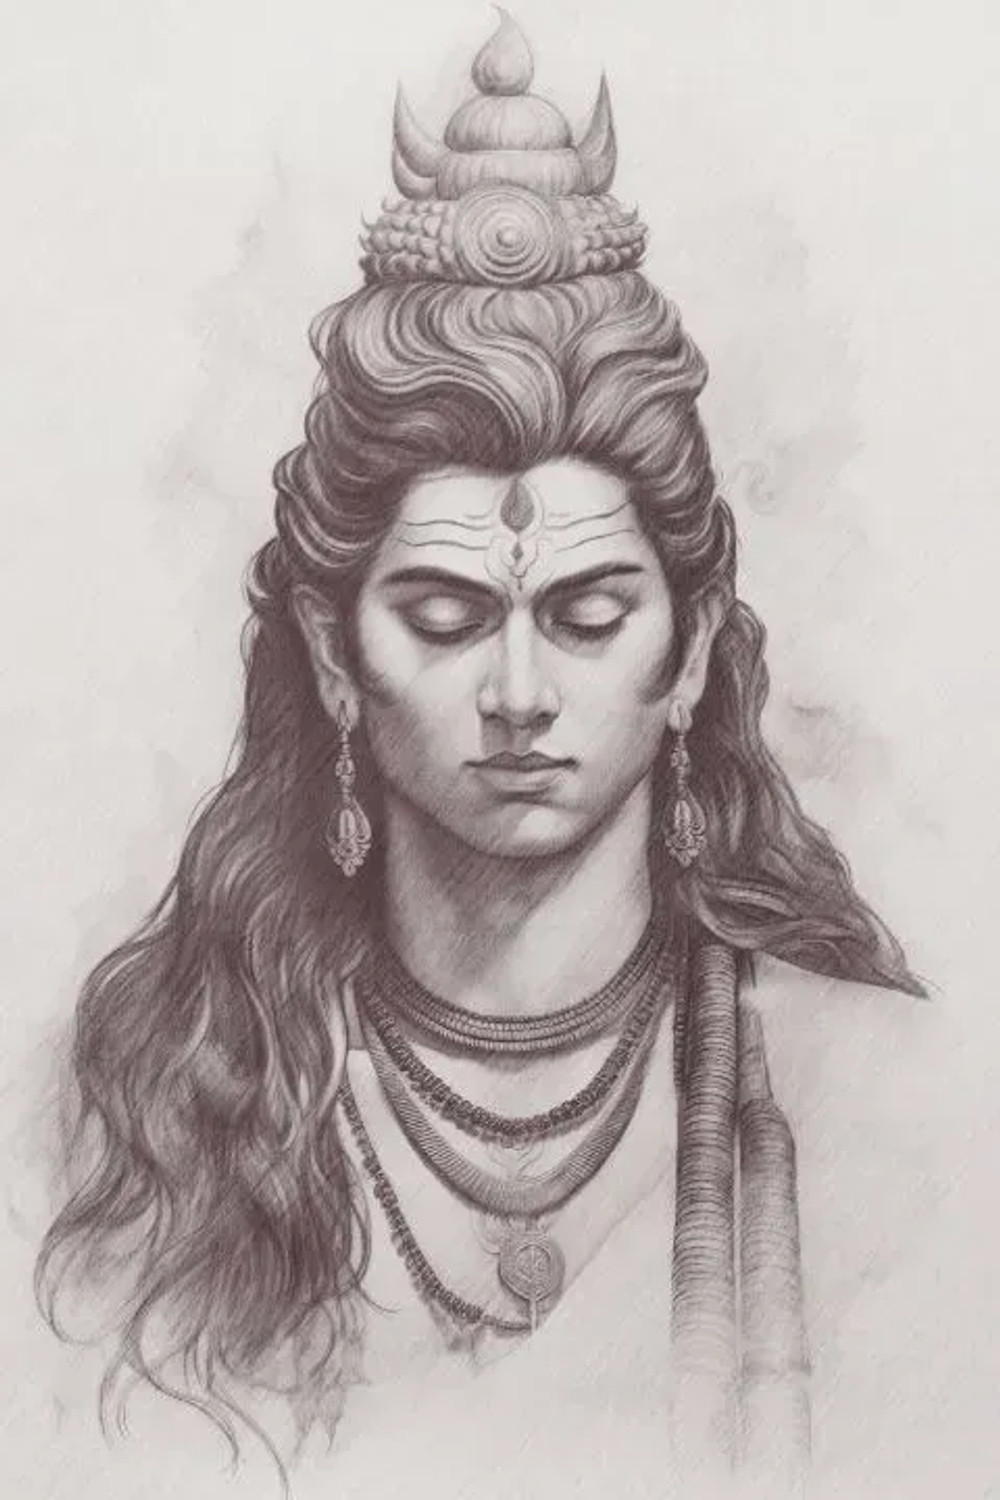 Aesthetic artist - Old stone structure of lord shiva pencil drawing. Drawing  video is on my youtube channel link in the bio . . #mahadev #shiva  #lordshiva #shivratri #mahashivratri #indianart #indianculture  #indianartists #